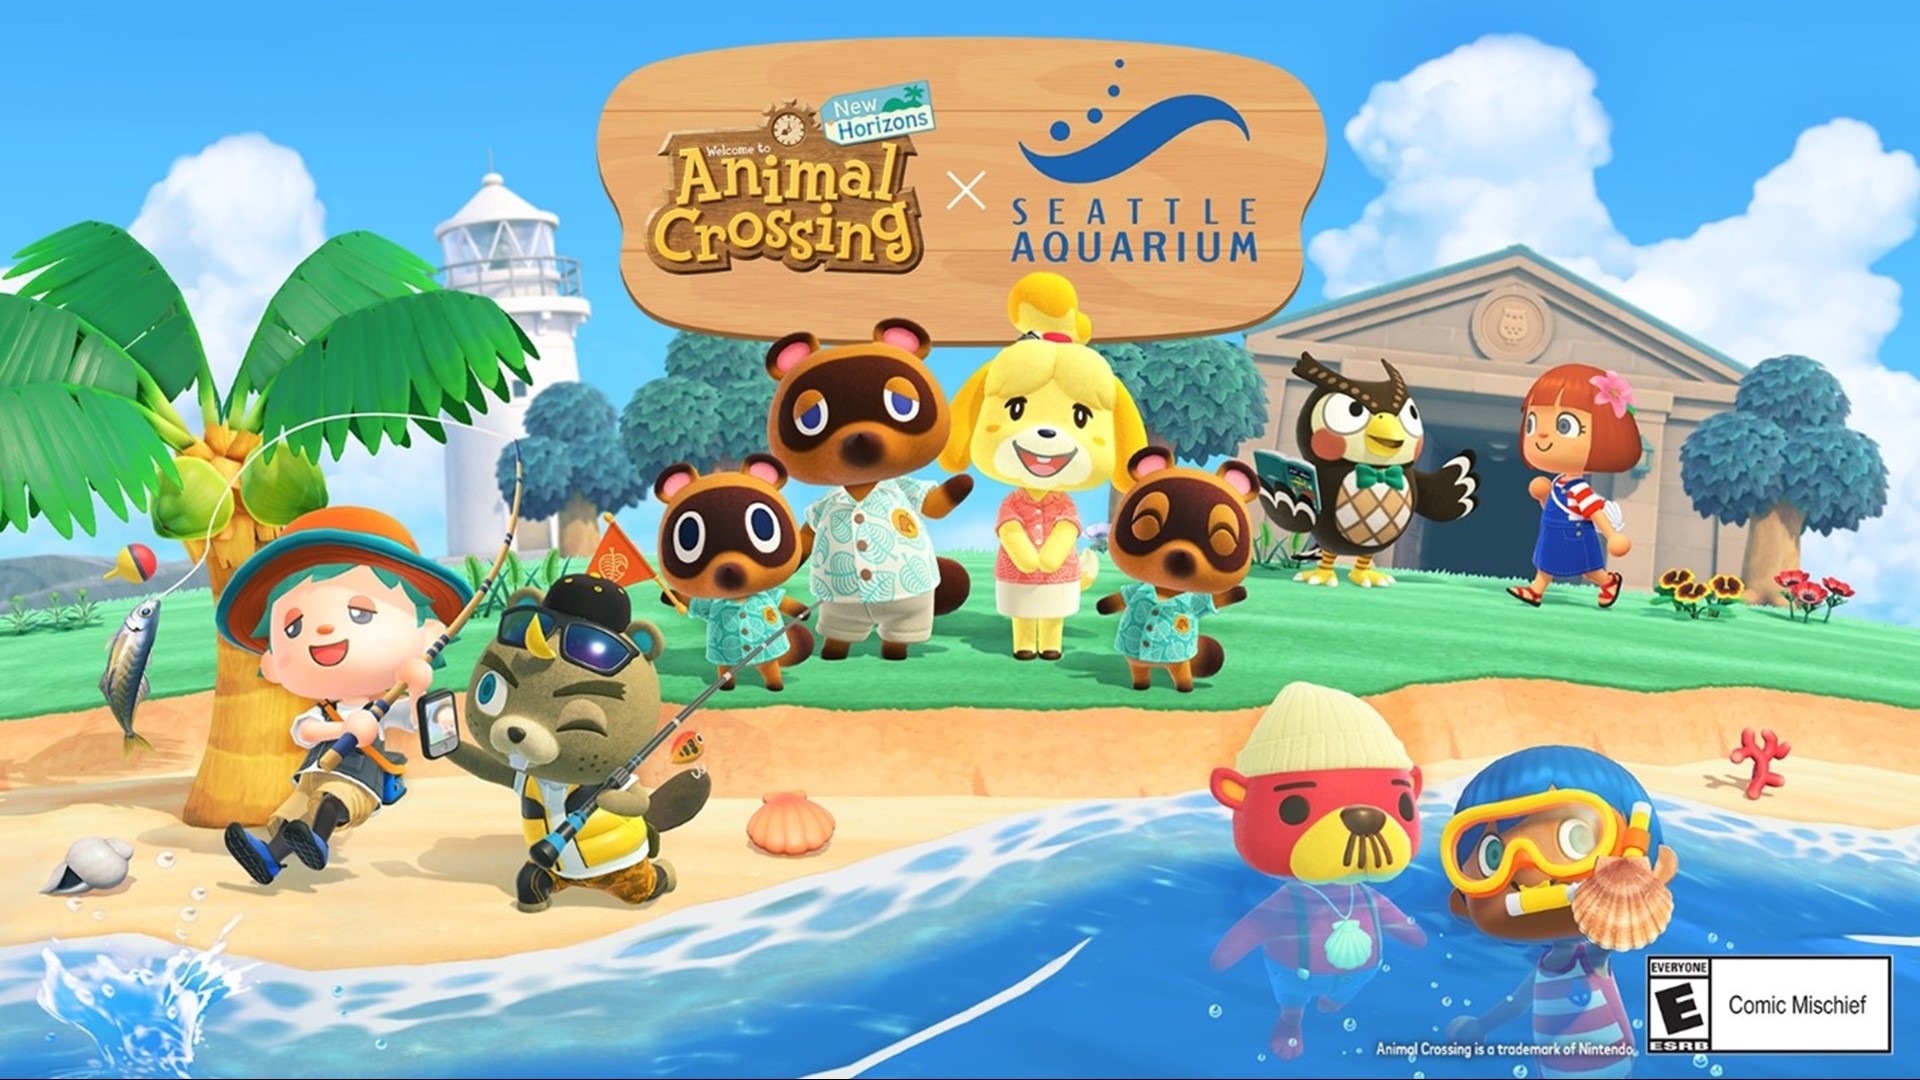 The Seattle Aquarium is bringing Animal Crossing: New Horizons to life with a new immersive exhibit, opening Oct. 7.